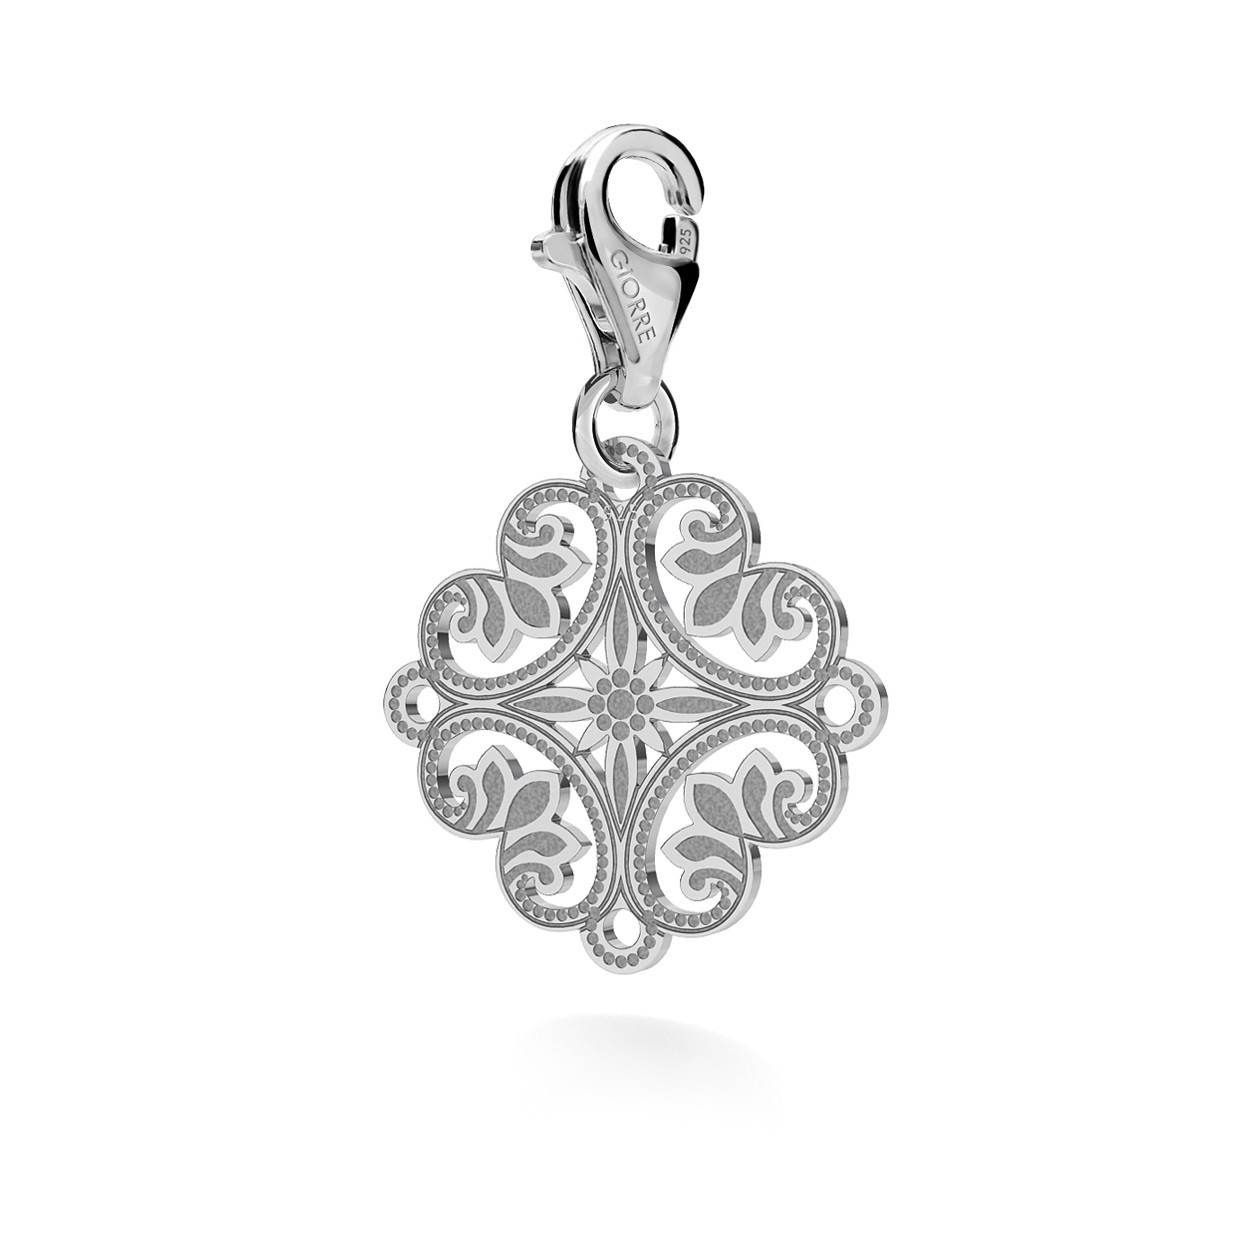 CHARM 103, BOHO ROSETTE, STERLING SILVER (925) RHODIUM OR GOLD PLATED